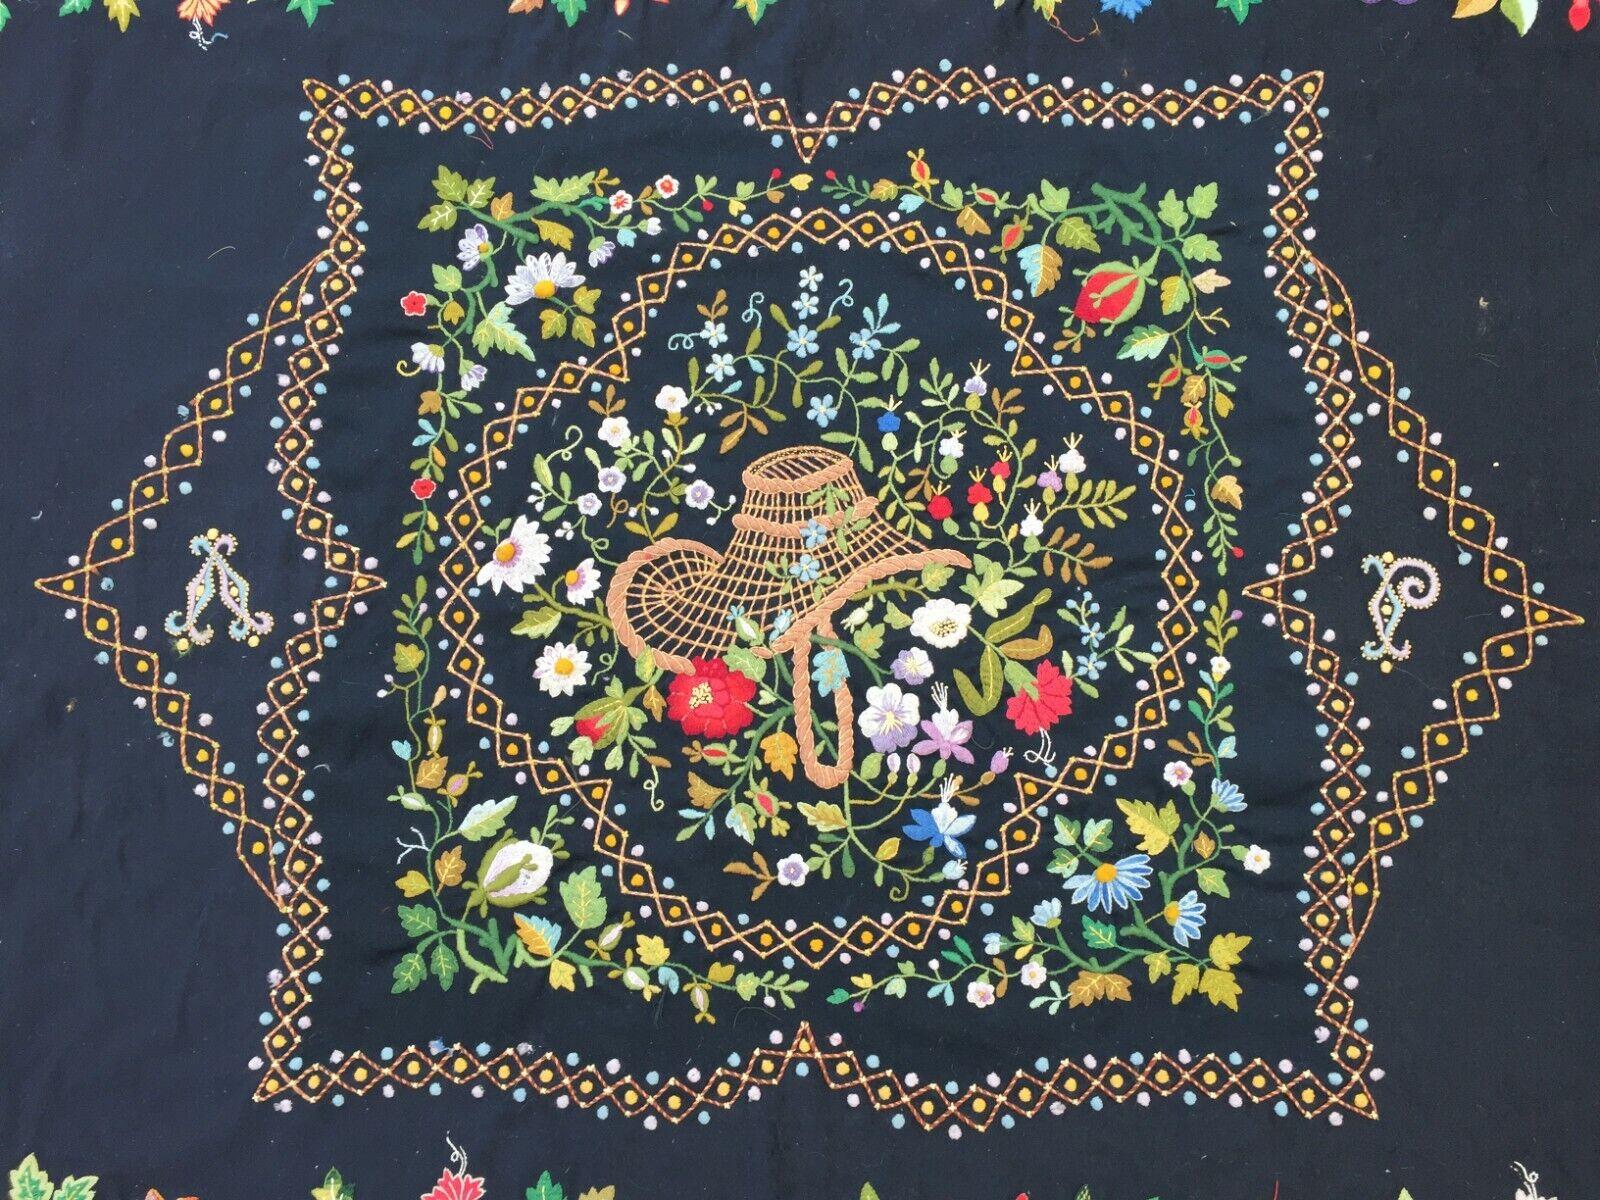 Handmade Antique French Needlepoint Rug 4.1' x 5.5', 1900s - 1W10 For Sale 4